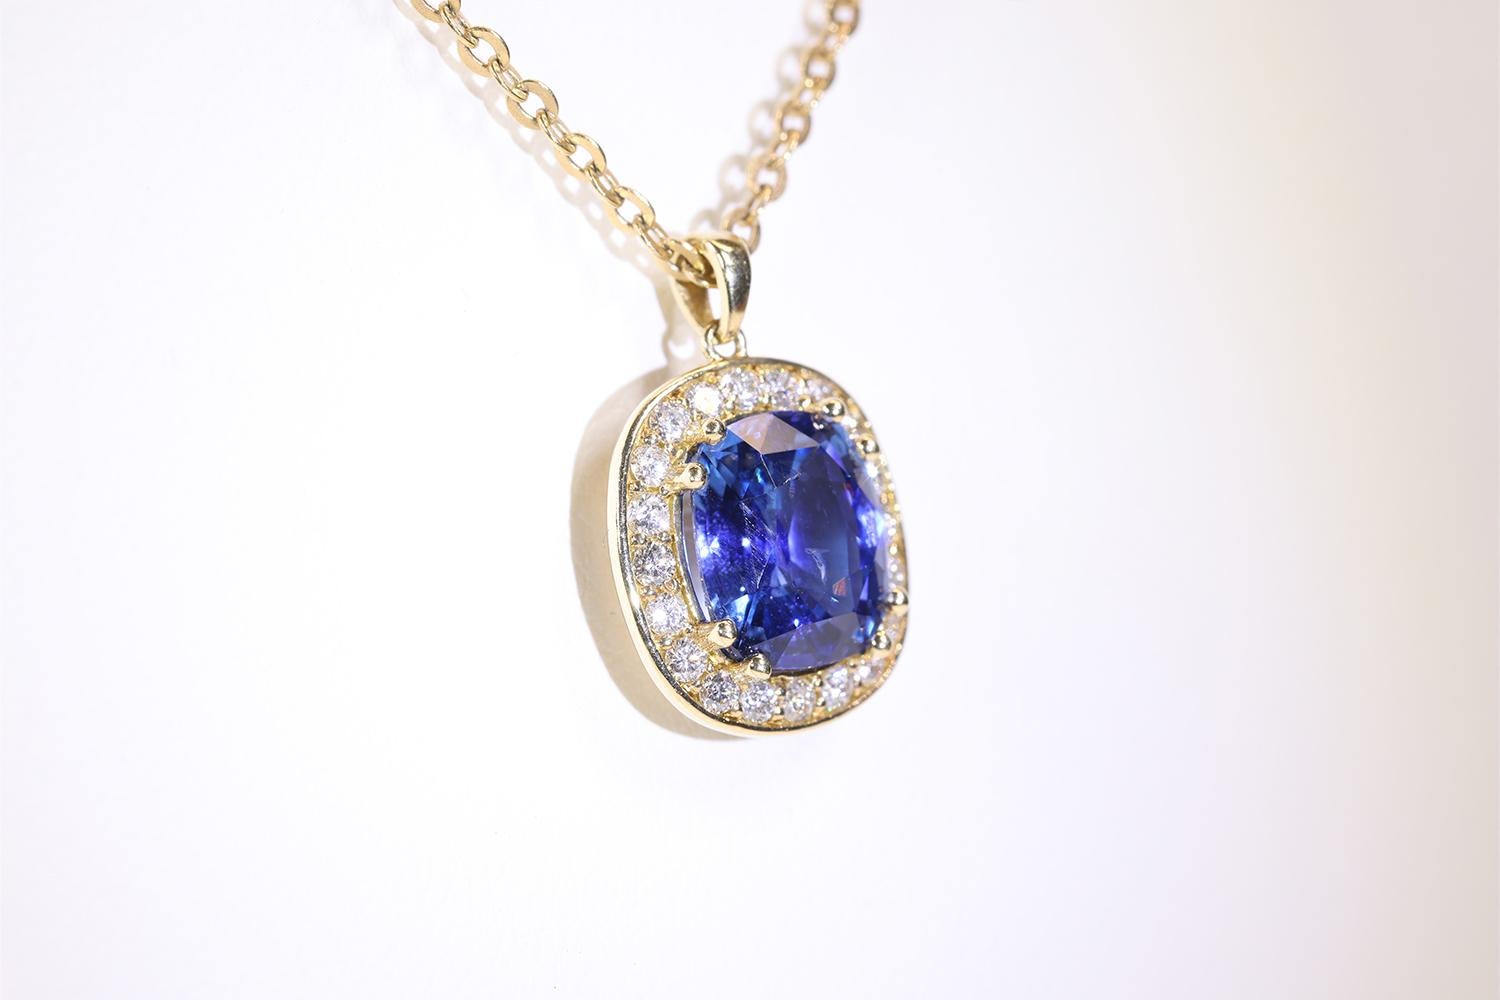 This is a beautiful high quality 3.321 Carat Ceylon Blue Sapphire pendant set in 18K yellow gold. The Sapphire is surrounded by a stunning halo of 20 diamonds with a total weight of 0.26 Carats. As you can see from the photos the pendant comes with